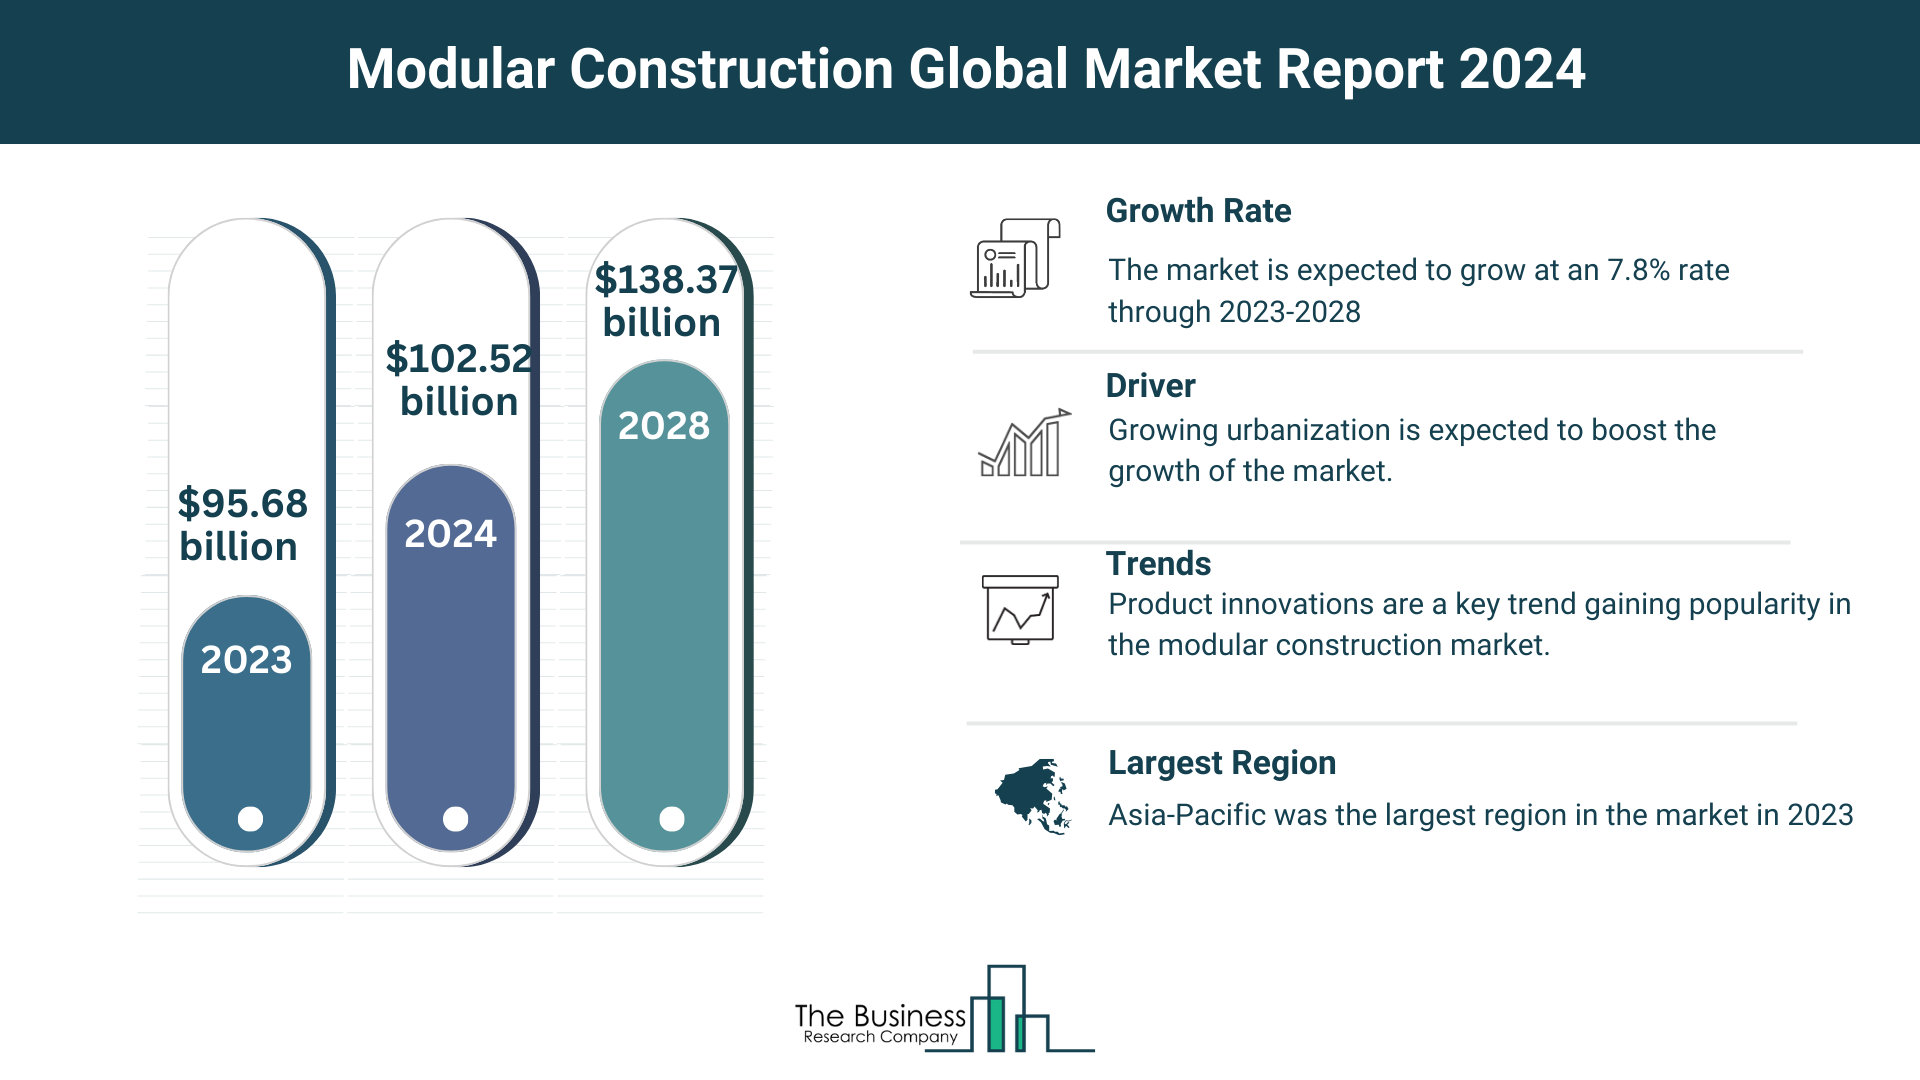 5 Key Takeaways From The Modular Construction Market Report 2024